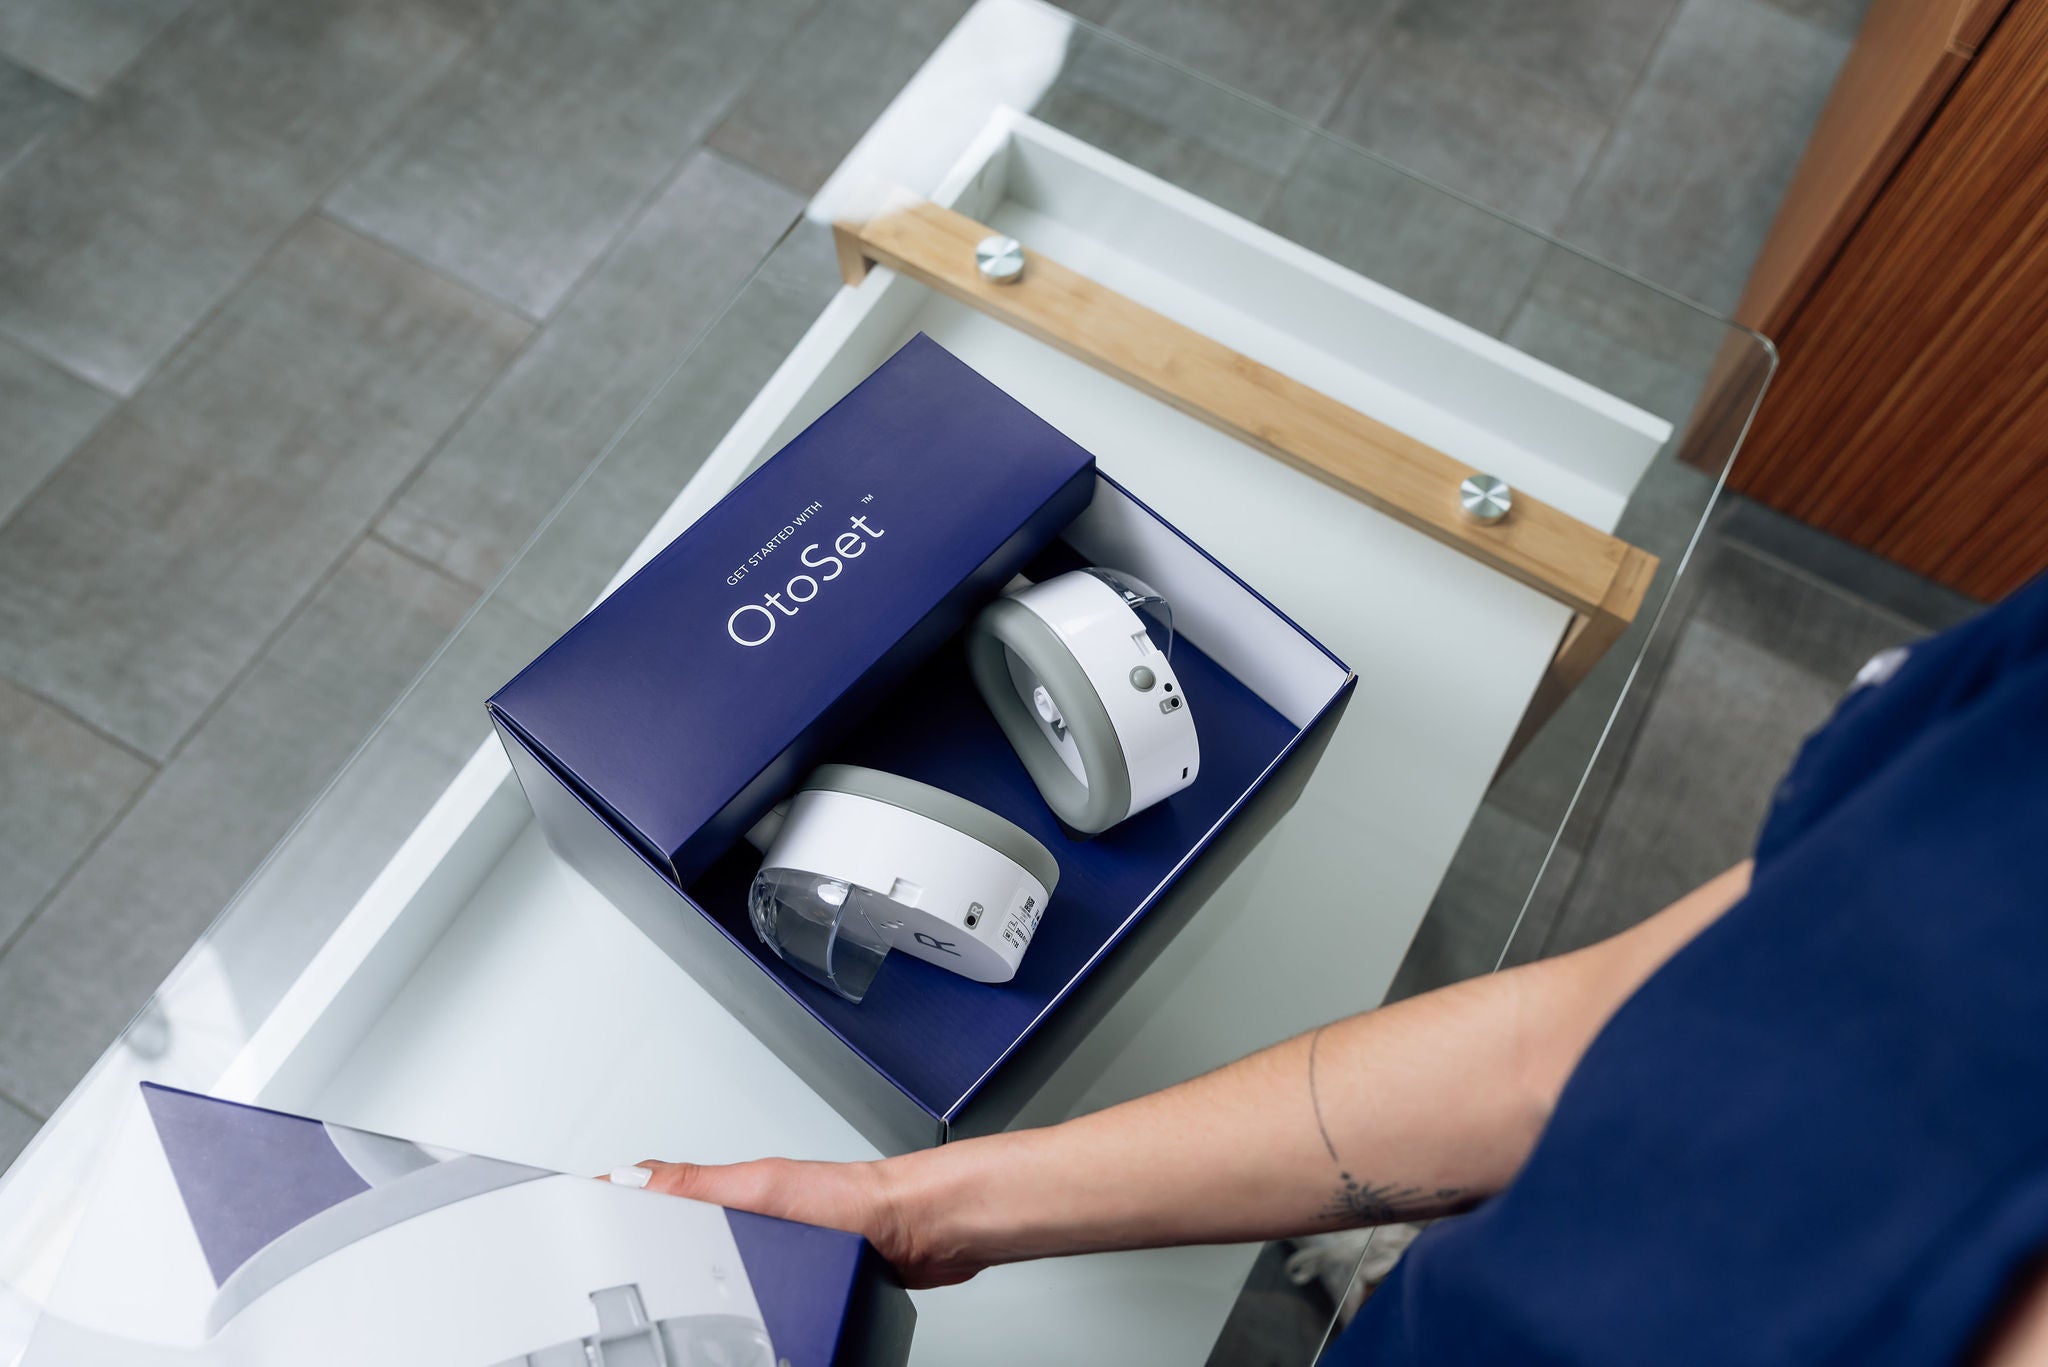 OtoSet® on Instagram: OtoSet® is the first automated ear-cleaning device  and is FDA-cleared. Discover more about OtoSet and watch it in action.  #earwax #medicaldevices #primarycare #earwaxremoval #otoset #audiology  #earcleaning #hearingloss